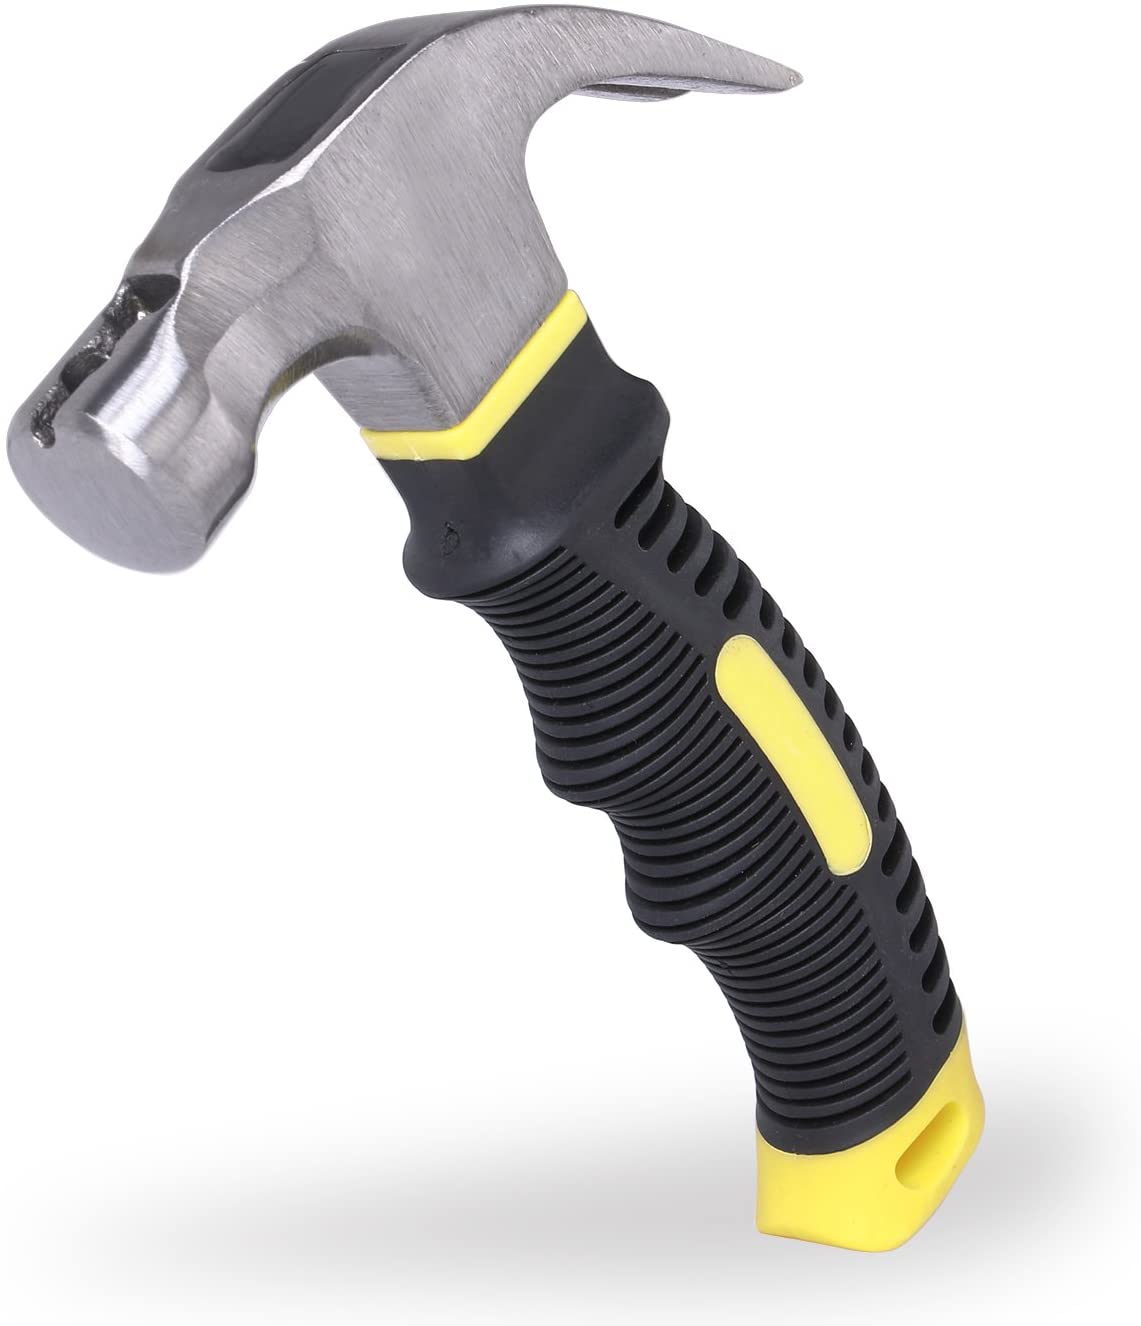 Stubby Claw Hammer with Magnetic Nail Starter